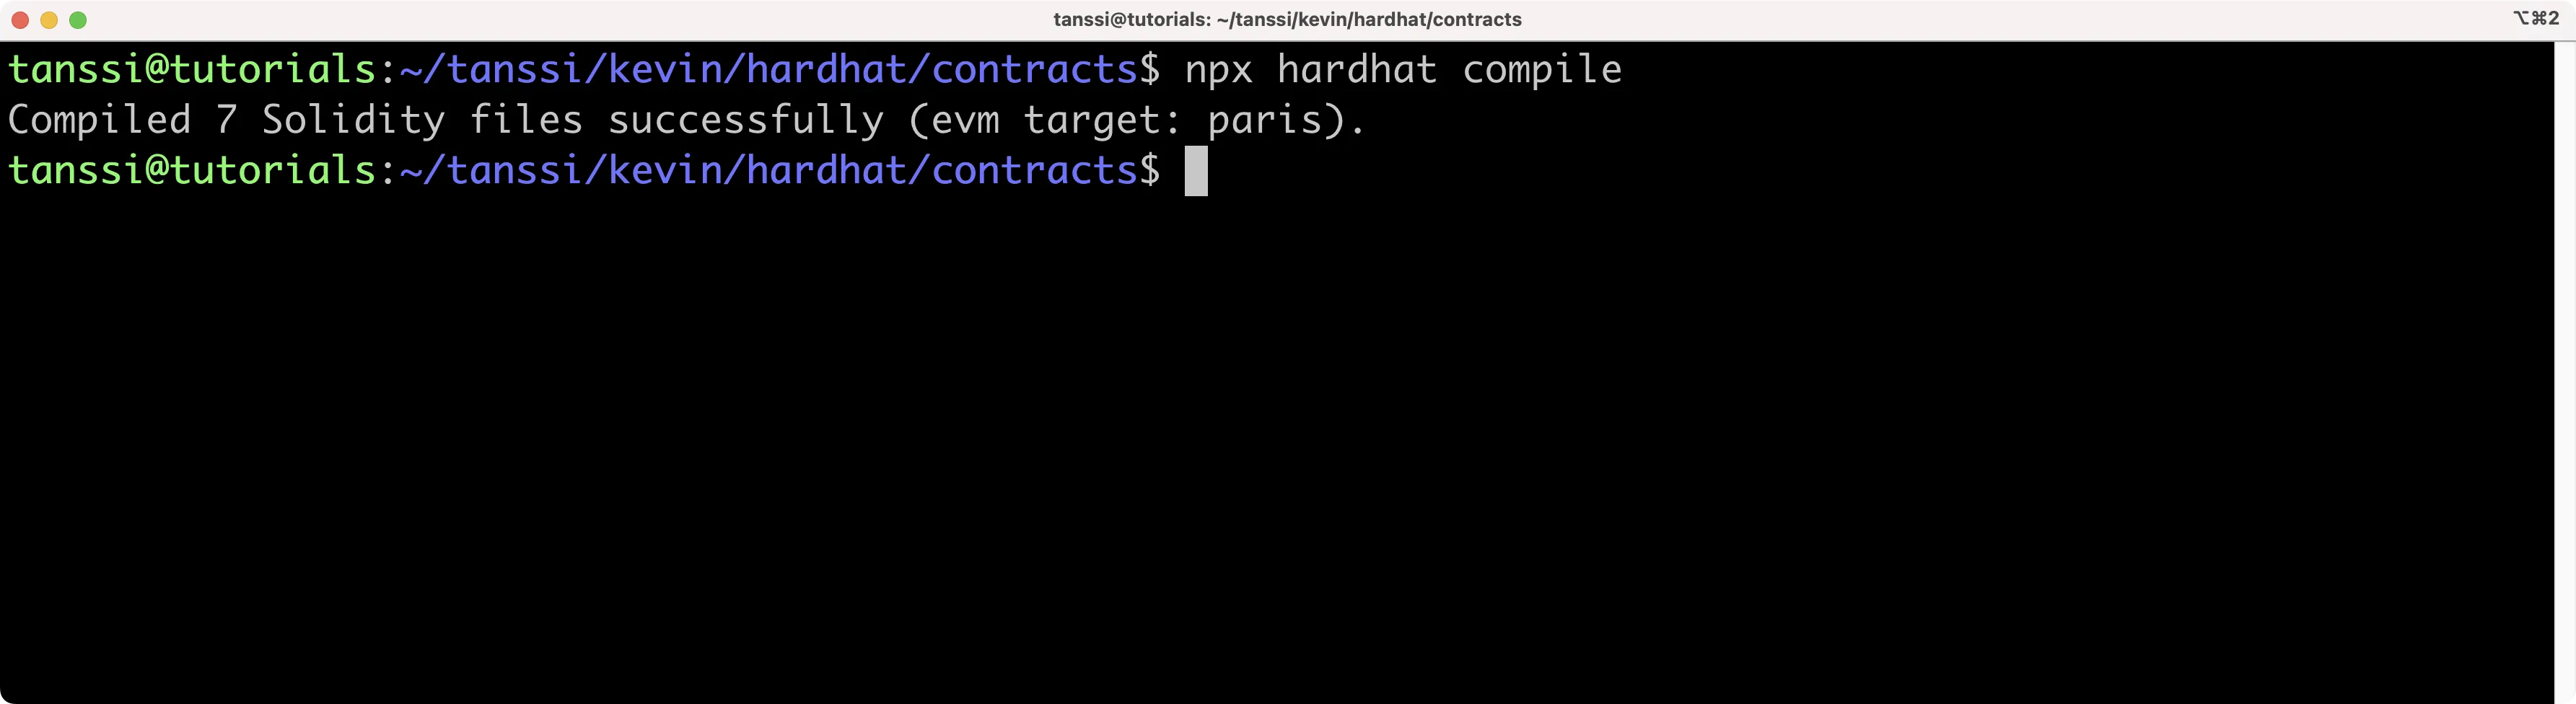 Compile contracts using Hardhat